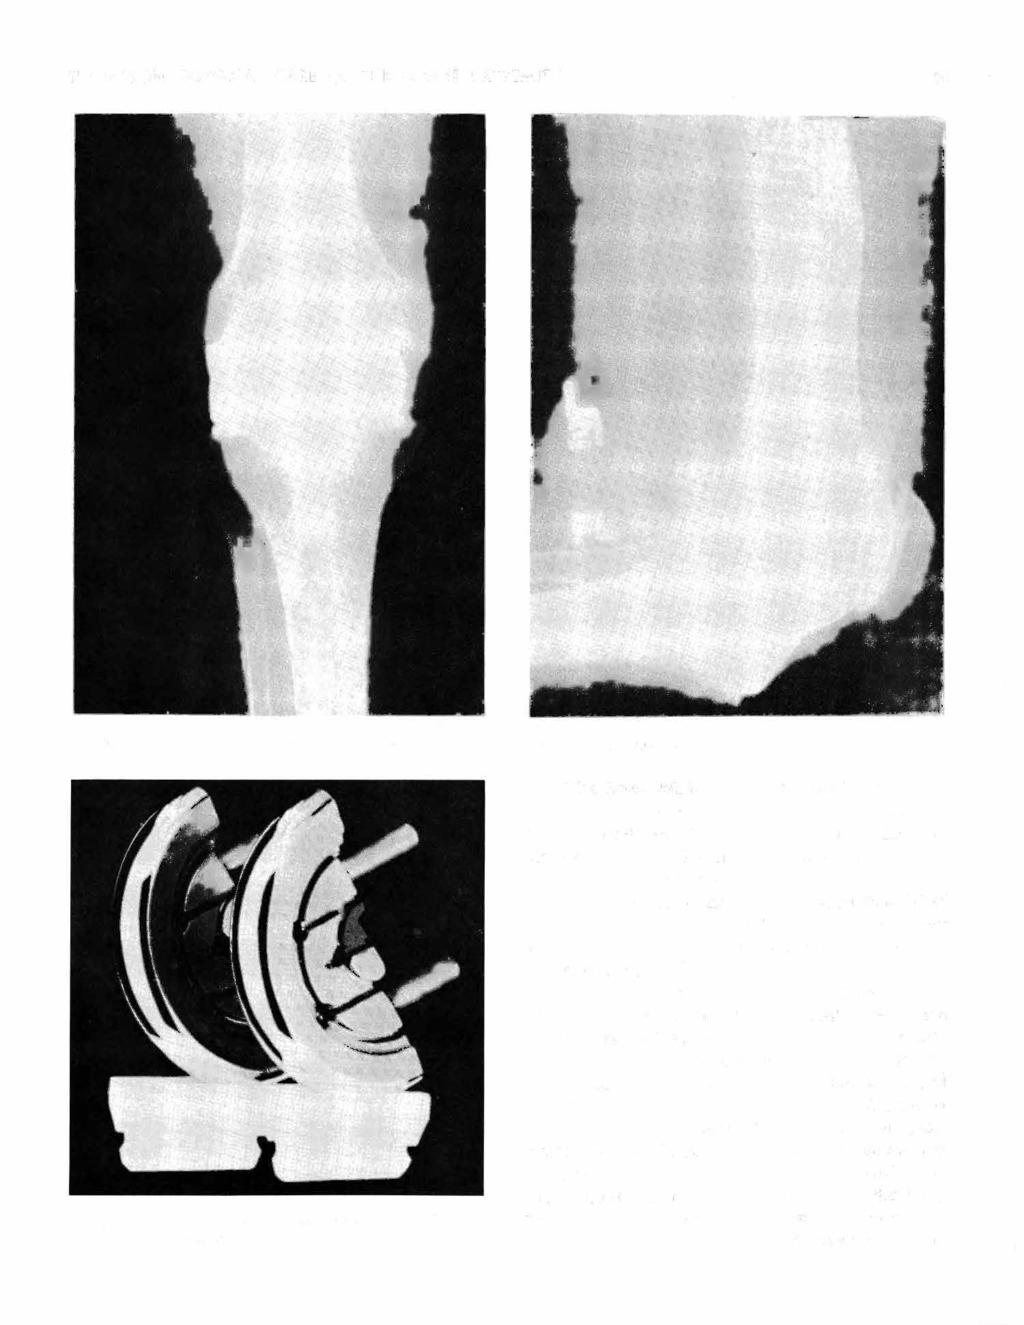 THOMPSON: SURGICAL CARE OF THE LOWER EXTREMITY 29 Fig. IO A, B-Postoperative condition of knee in figure 9, converted to a Walldius hinged prosthesis. Fig. 11-Polycentric knee joint as modified from Gunston by Bryan and Peterson.